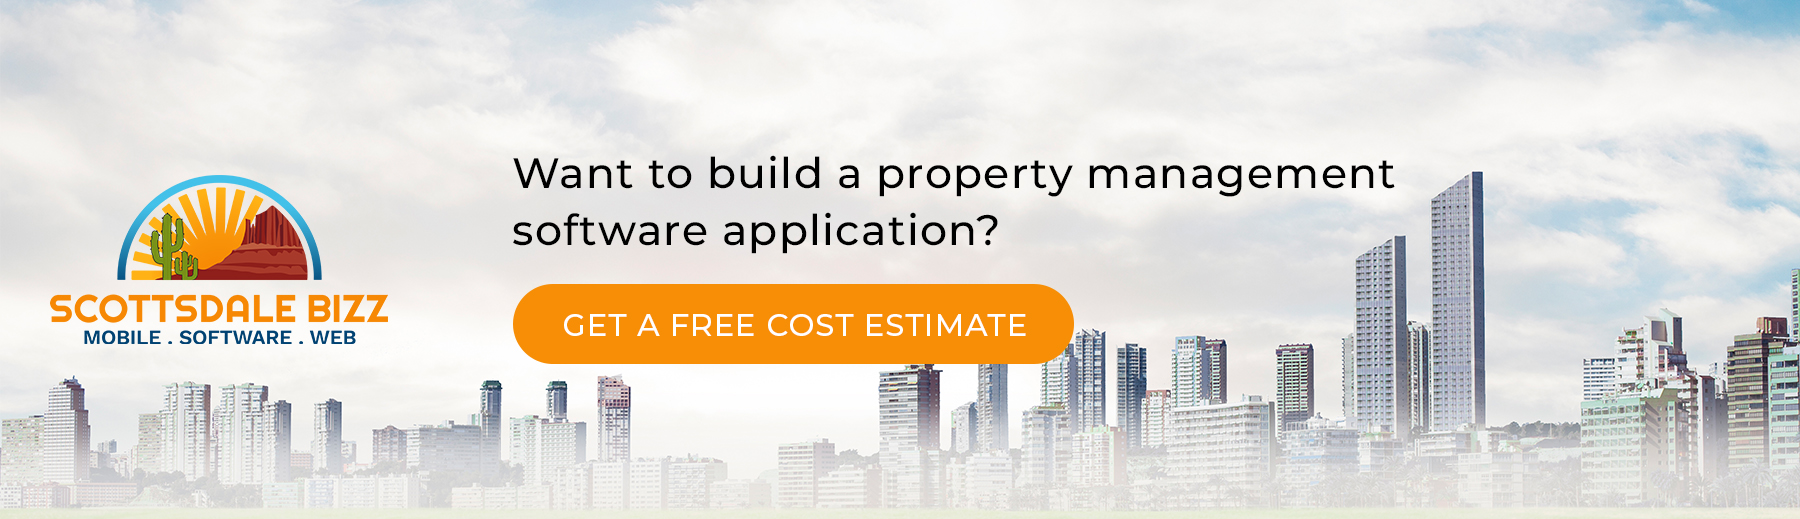 Want to build a property management software application